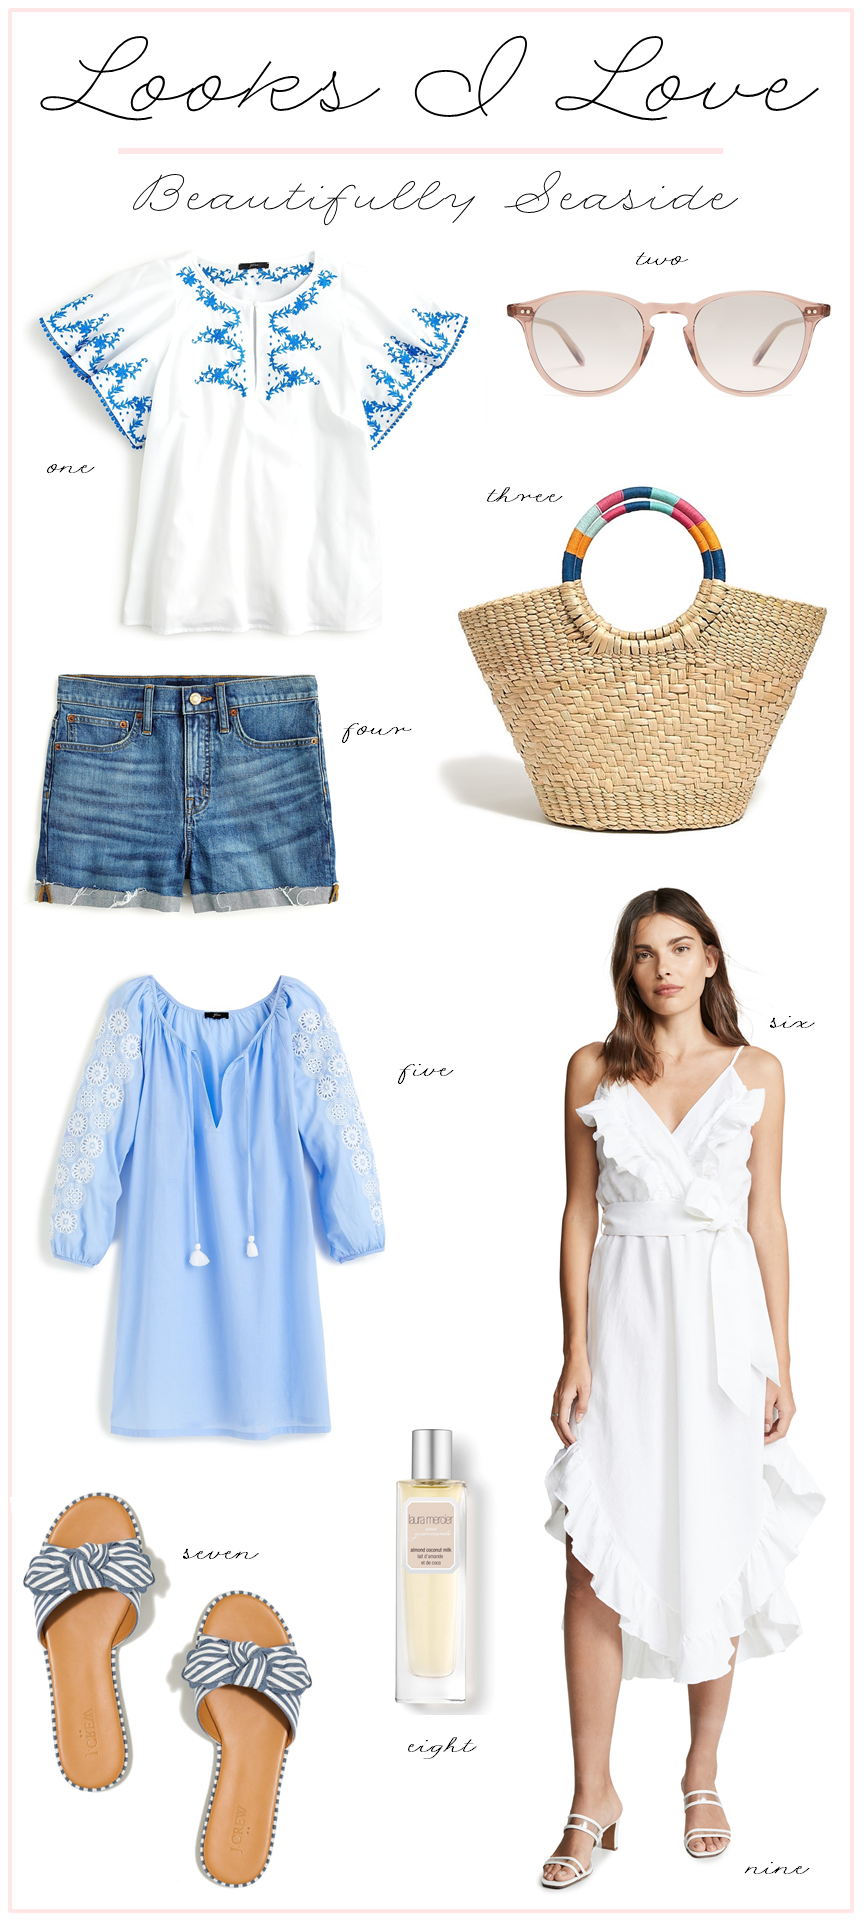 SUMMER VACATION OUTFIT IDEAS / LOOKS I LOVE Beautifully Seaside